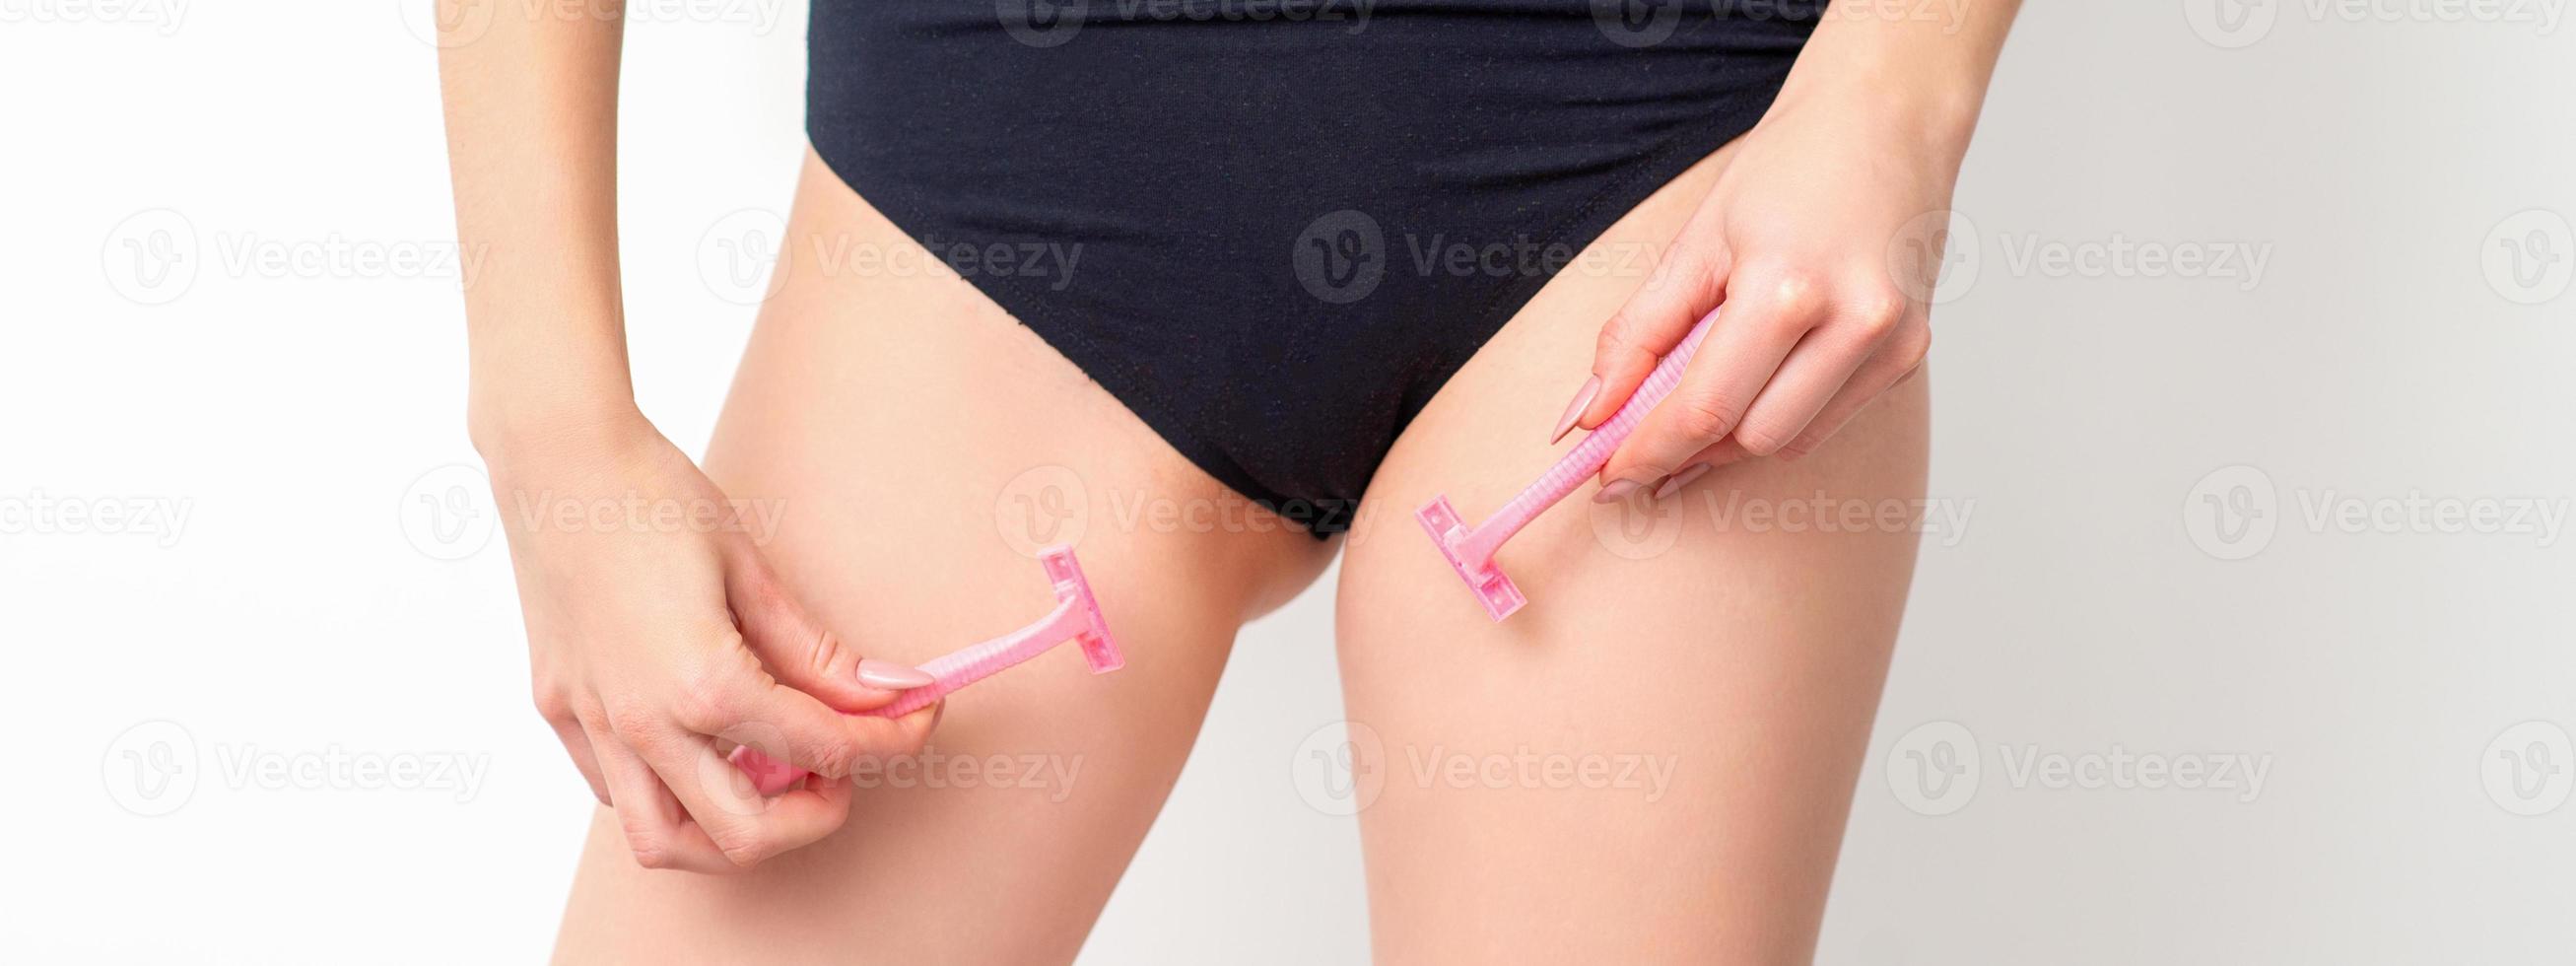 Young woman shaving crotch in bikini zone with two razors standing on white background, concept skincare and hair removal. photo